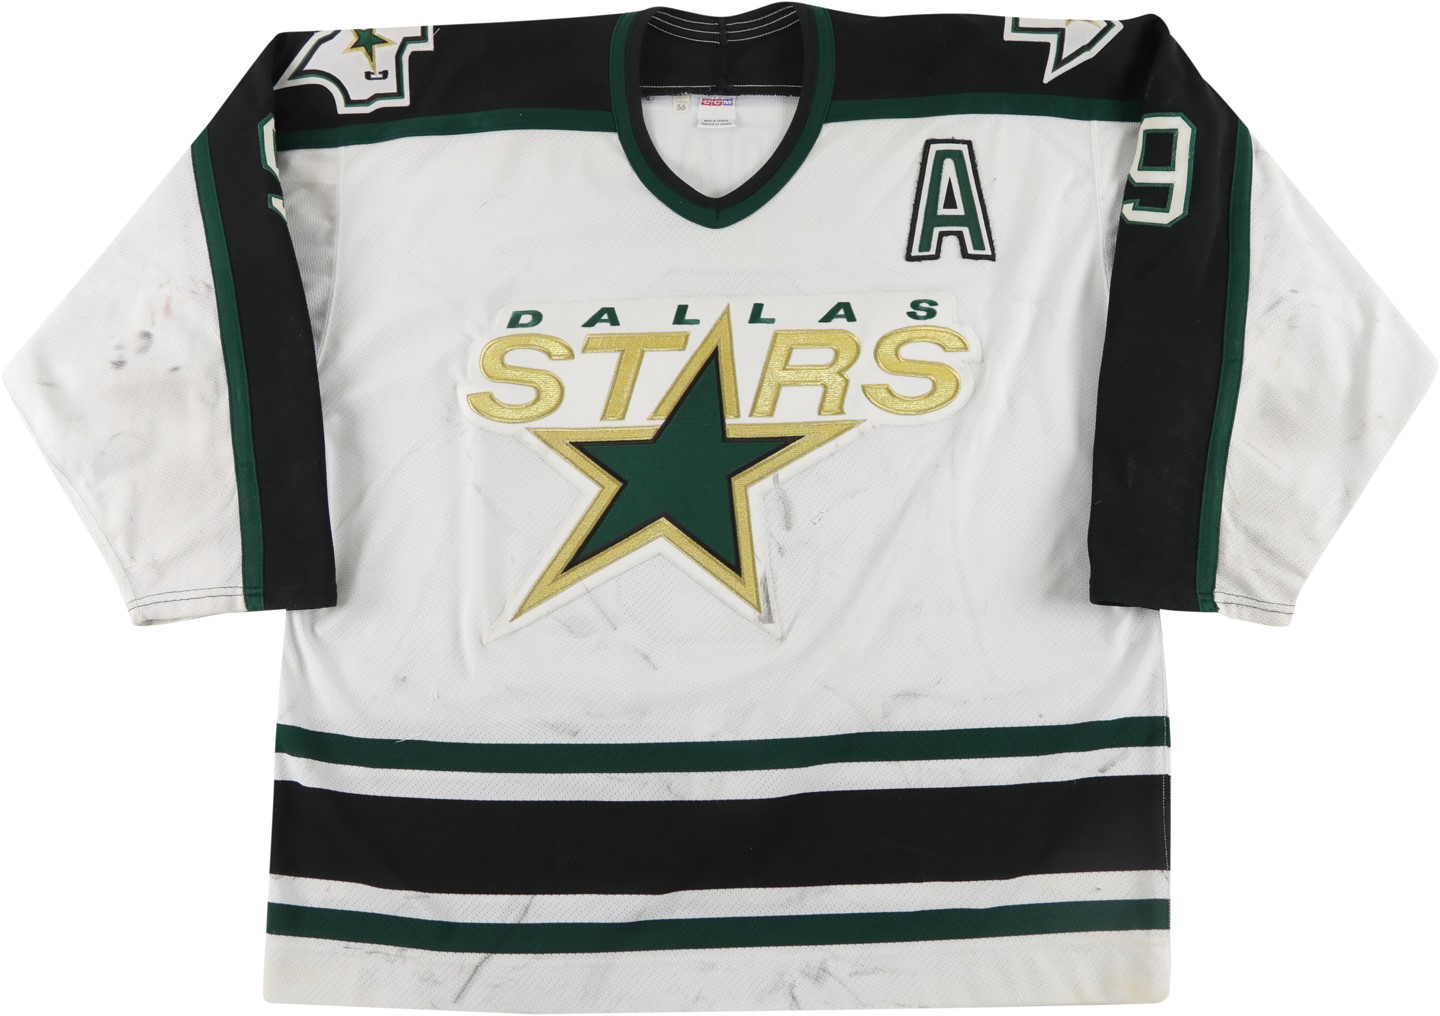 - 1998-99 Mike Modano Dallas Stars "Stanley Cup Collection" Game Worn Jersey (Photo-Matched, MeiGray & Team LOA)